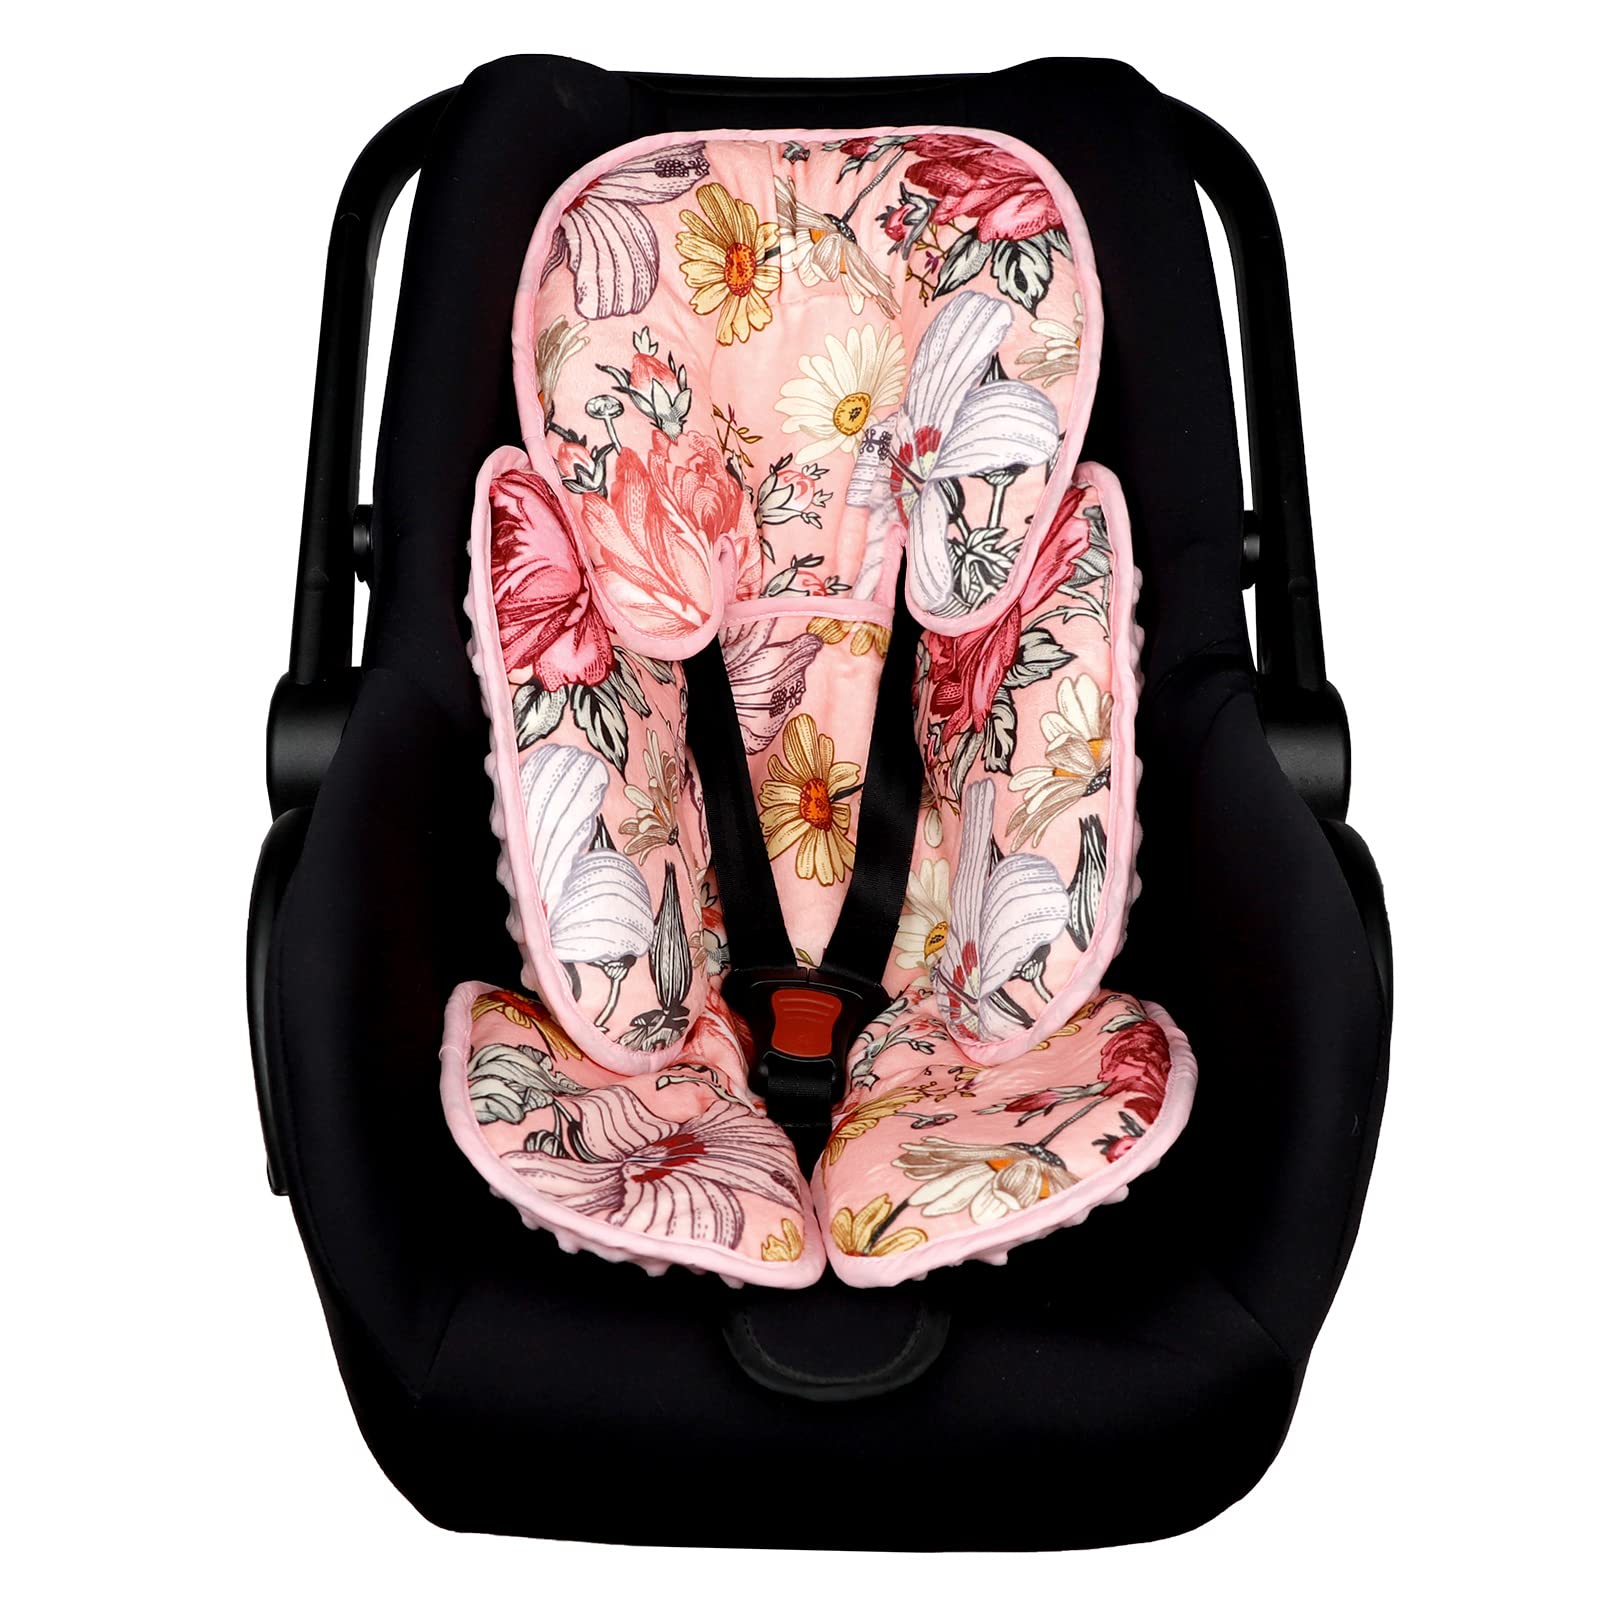 Pink Infant Car Seat Head Body Support Pillow,Baby Car Seat Cover Girls, Infant Carseat Canopy, Stretchy Multi- use Nursing Cover for Stroller/High Chair/Shopping Cart/Car Seat Canopies